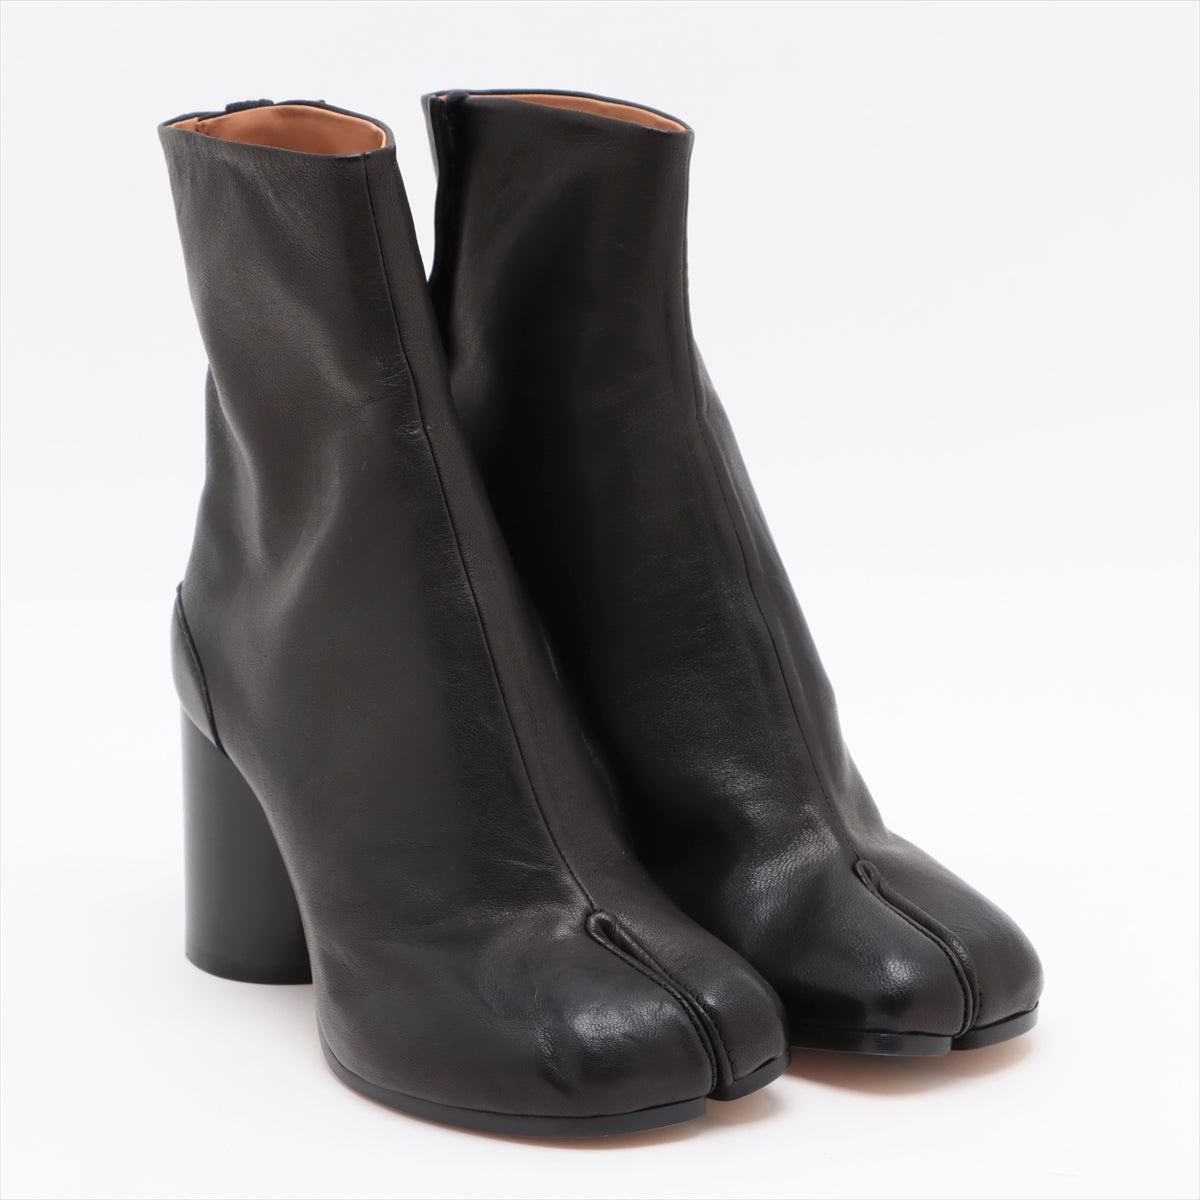 Maison Margiela TABI Leather Short Boots 35 Ladies' Black 22 box There is a bag